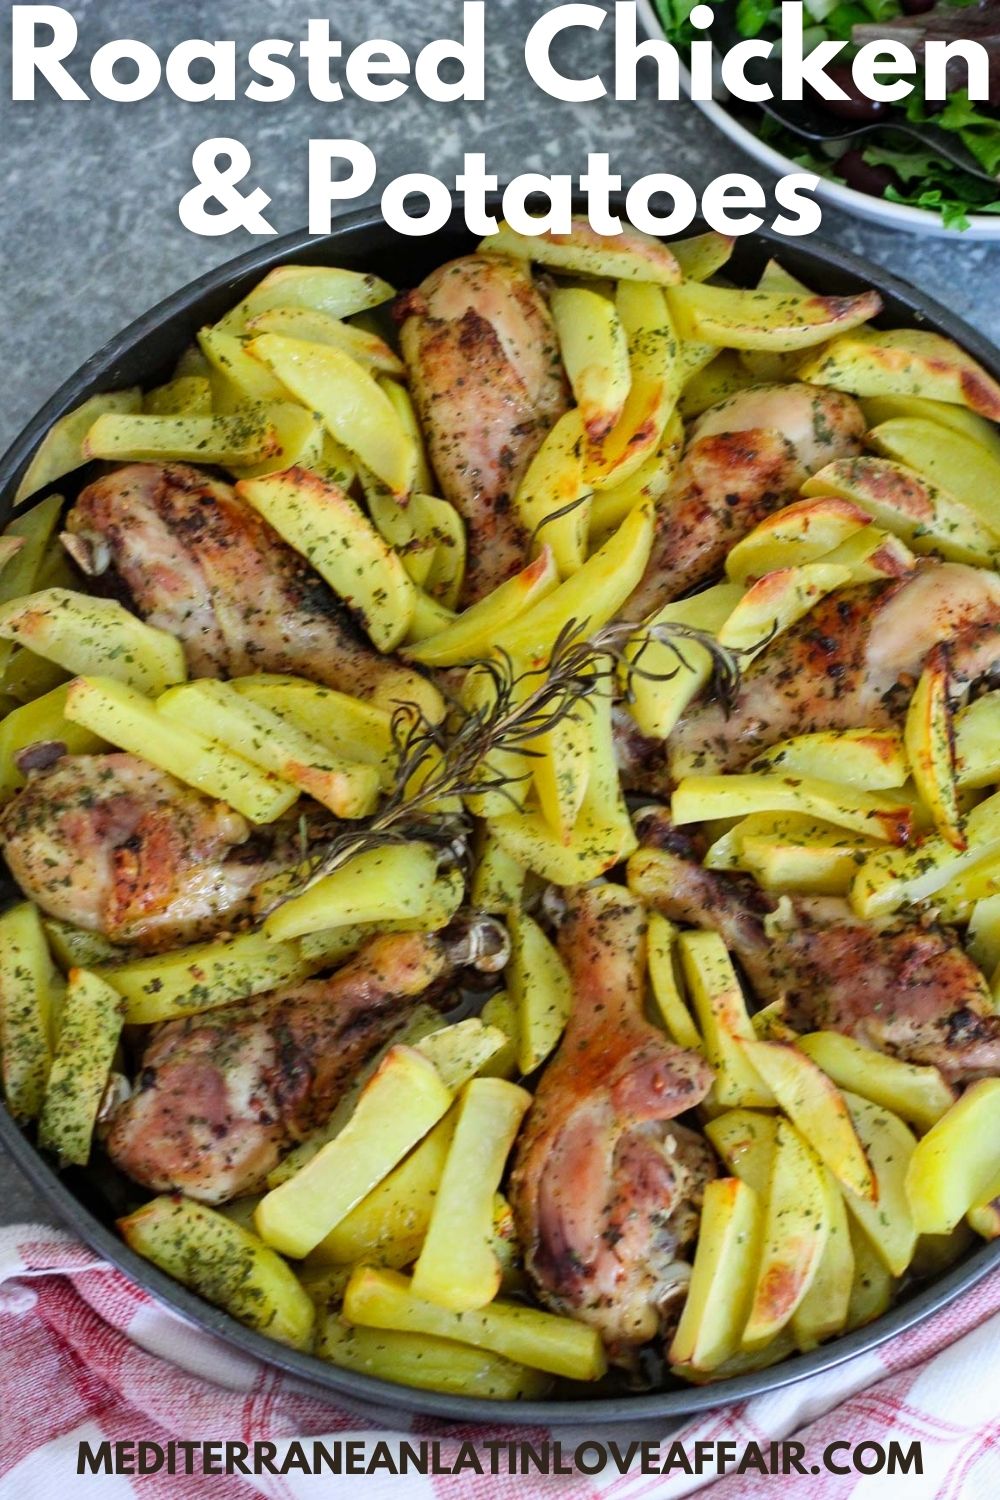 An image prepared for Pinterest, it shows a picture of a round baking dish full with chicken drumsticks and potatoes in a circular pattern. On top there's a title bar and bottom the website link.